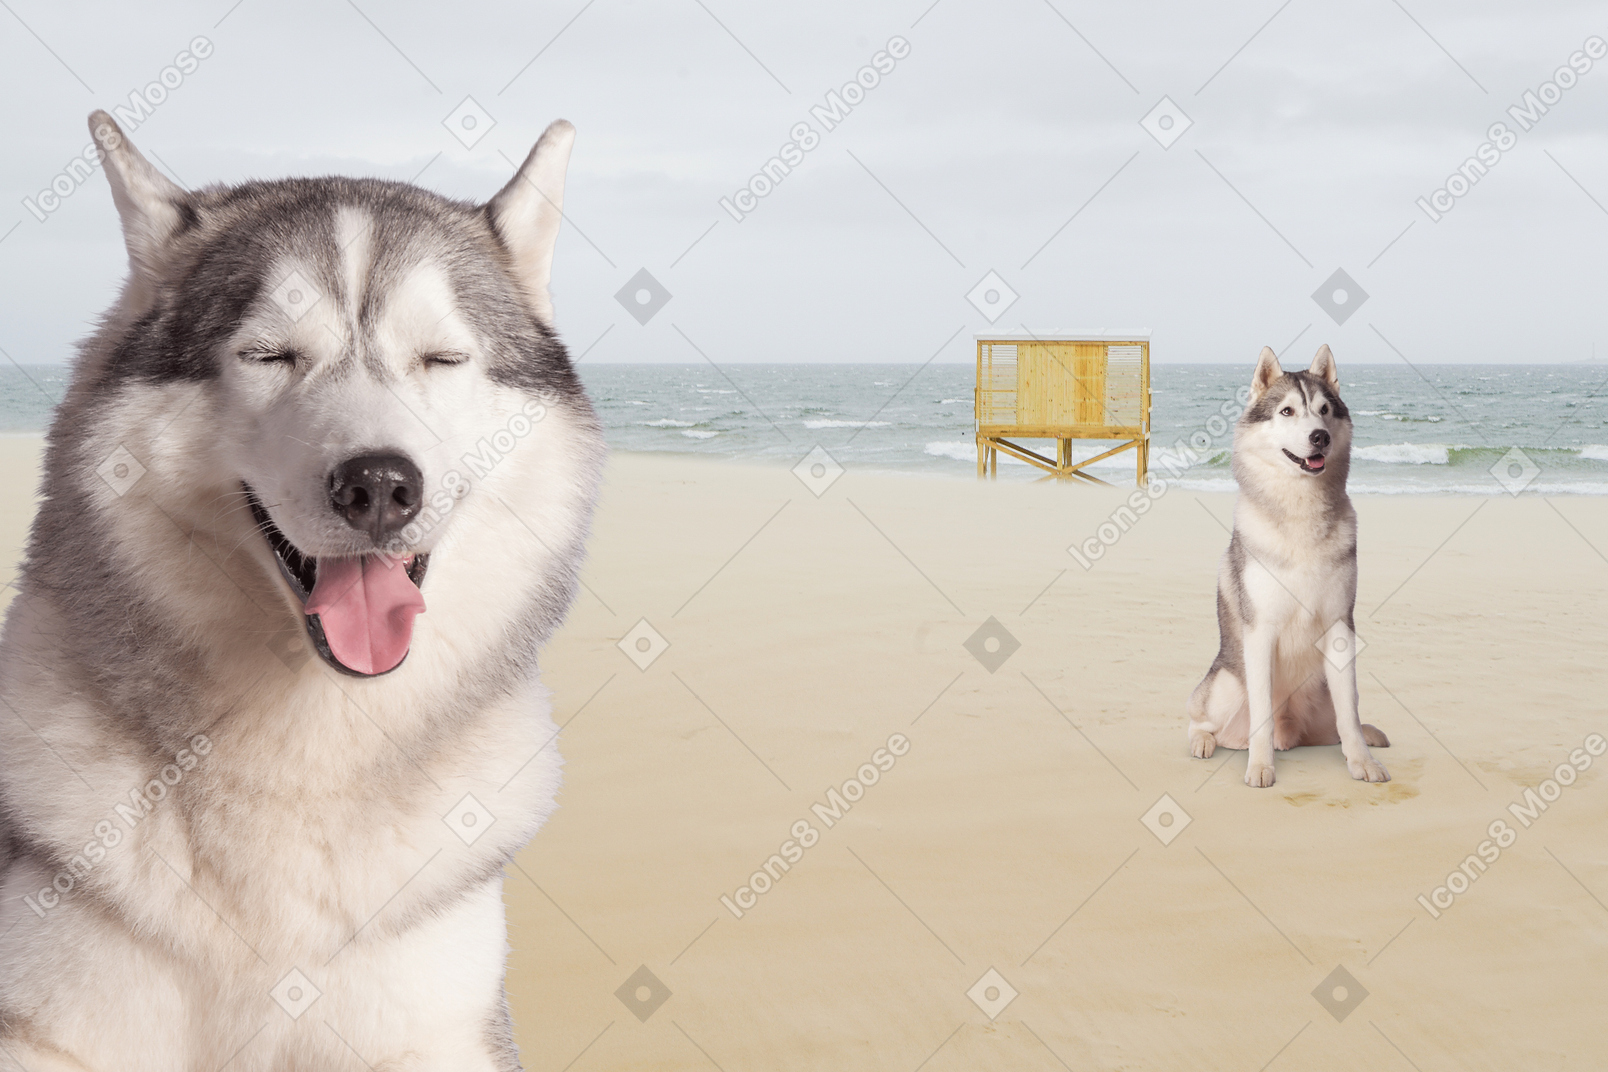 A husky dog sitting on a beach next to another dog